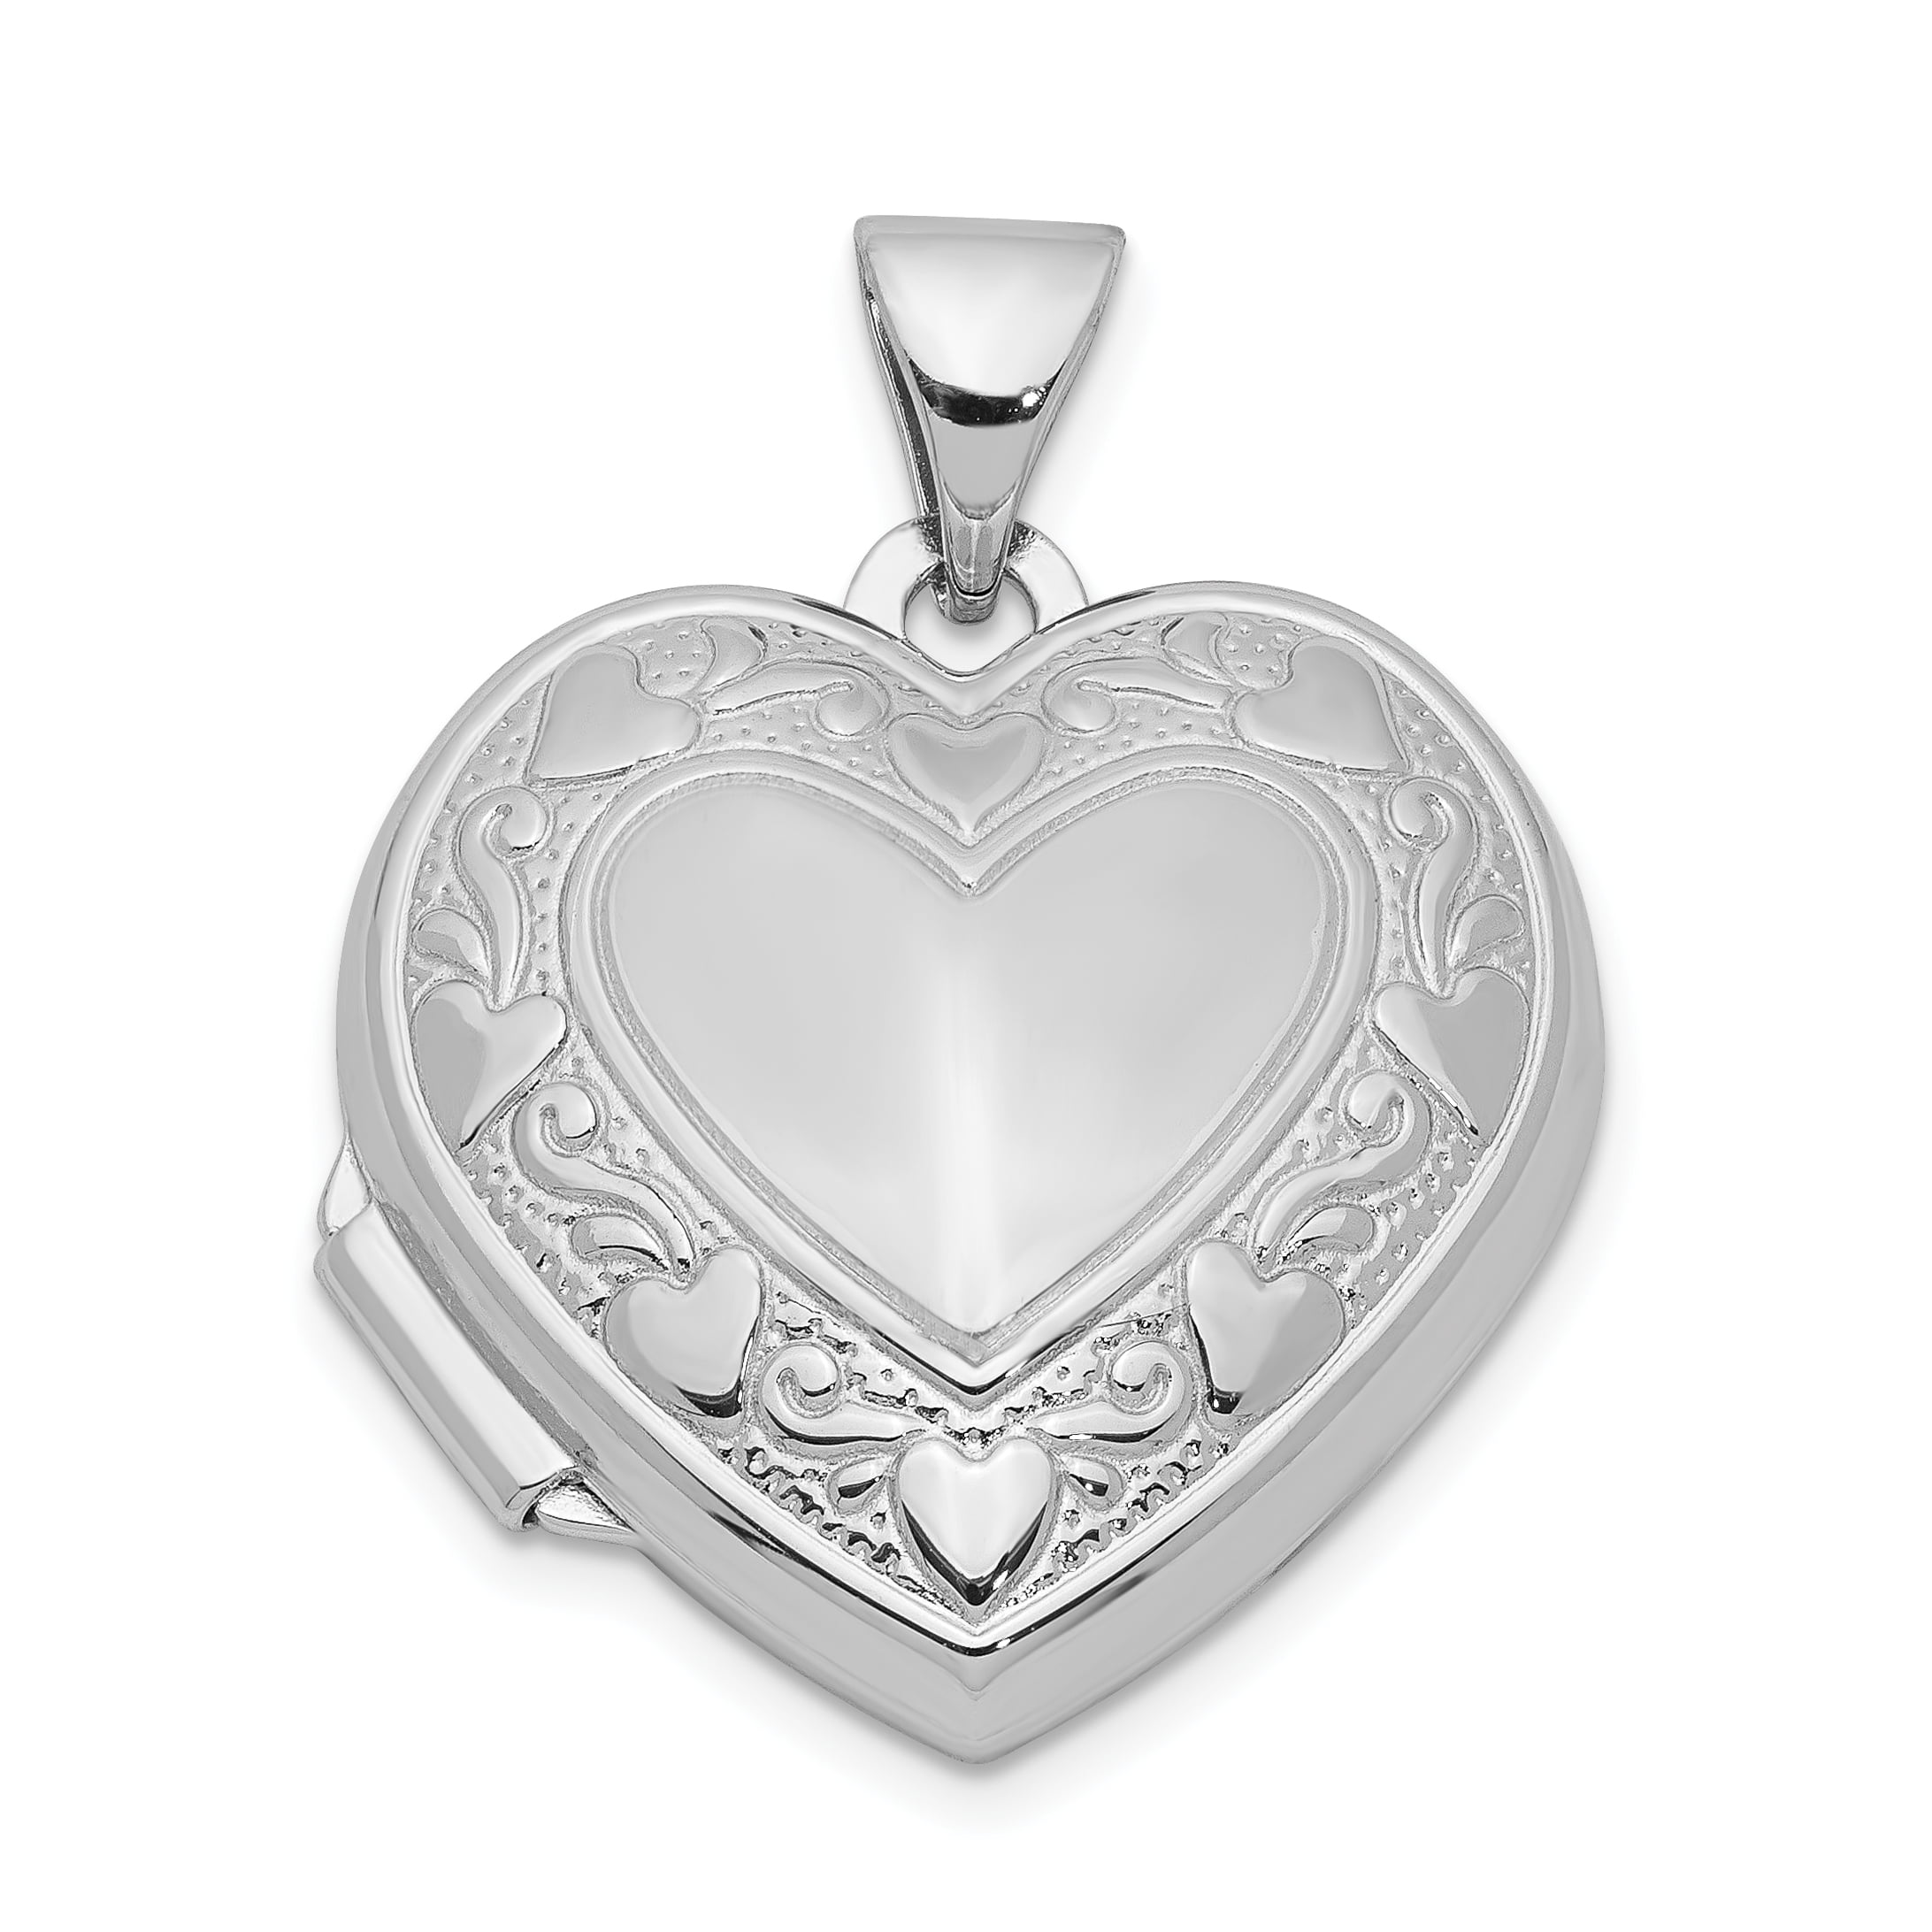 925 Sterling Silver Textured 18mm Floral Heart Photo Pendant Charm Locket Chain Necklace That Holds Pictures Flower Gardening Fine Jewelry For Women Gifts For Her 